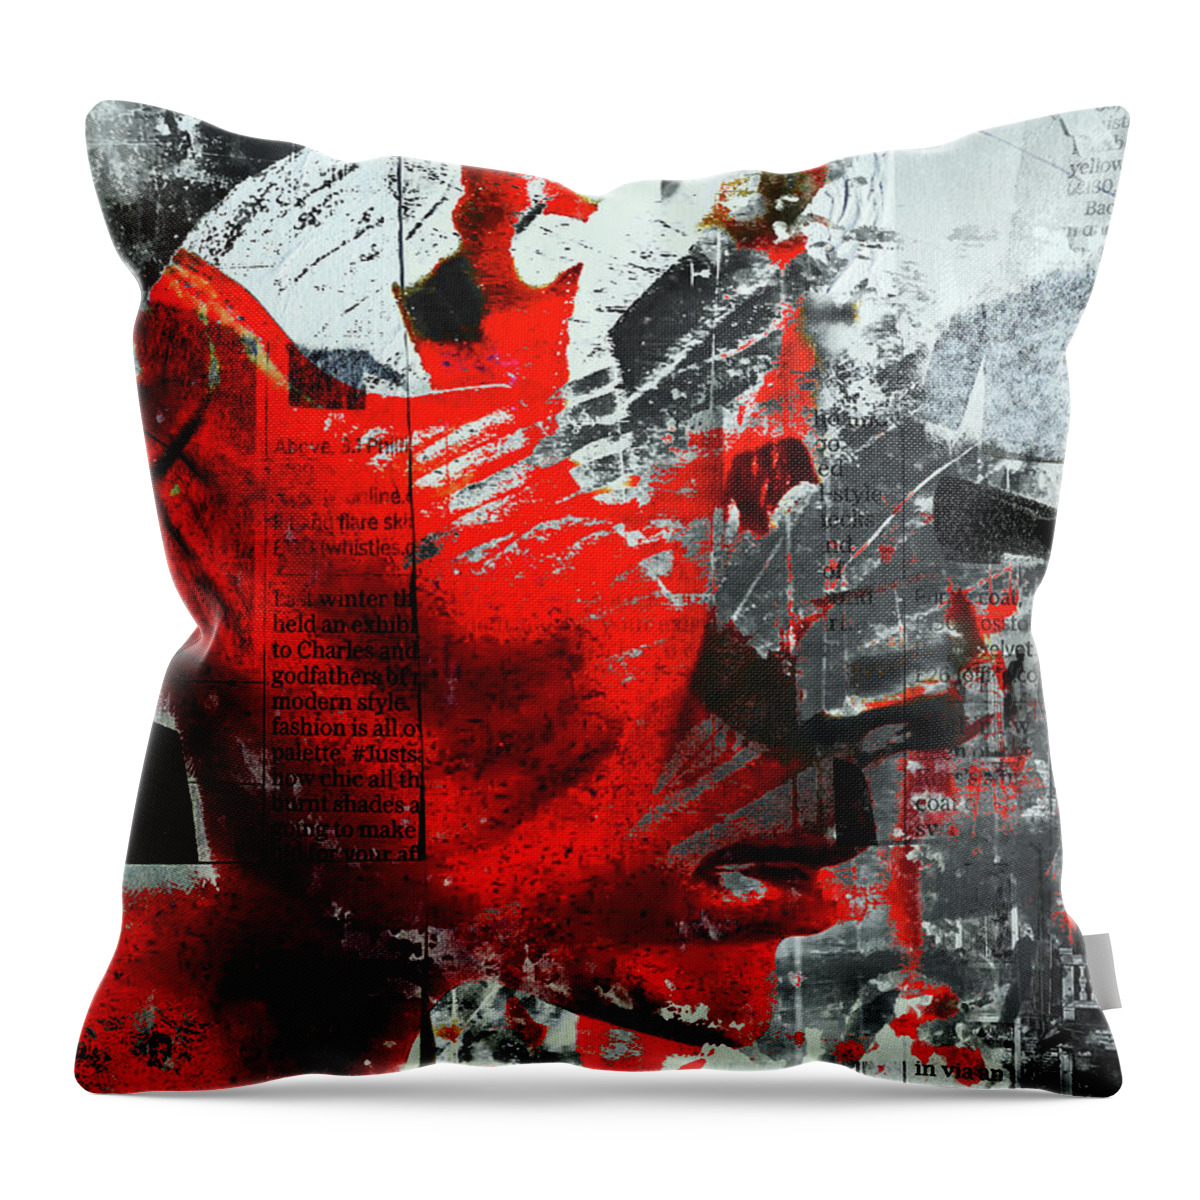 Confusion Throw Pillow featuring the photograph The red head in confusion by Gabi Hampe